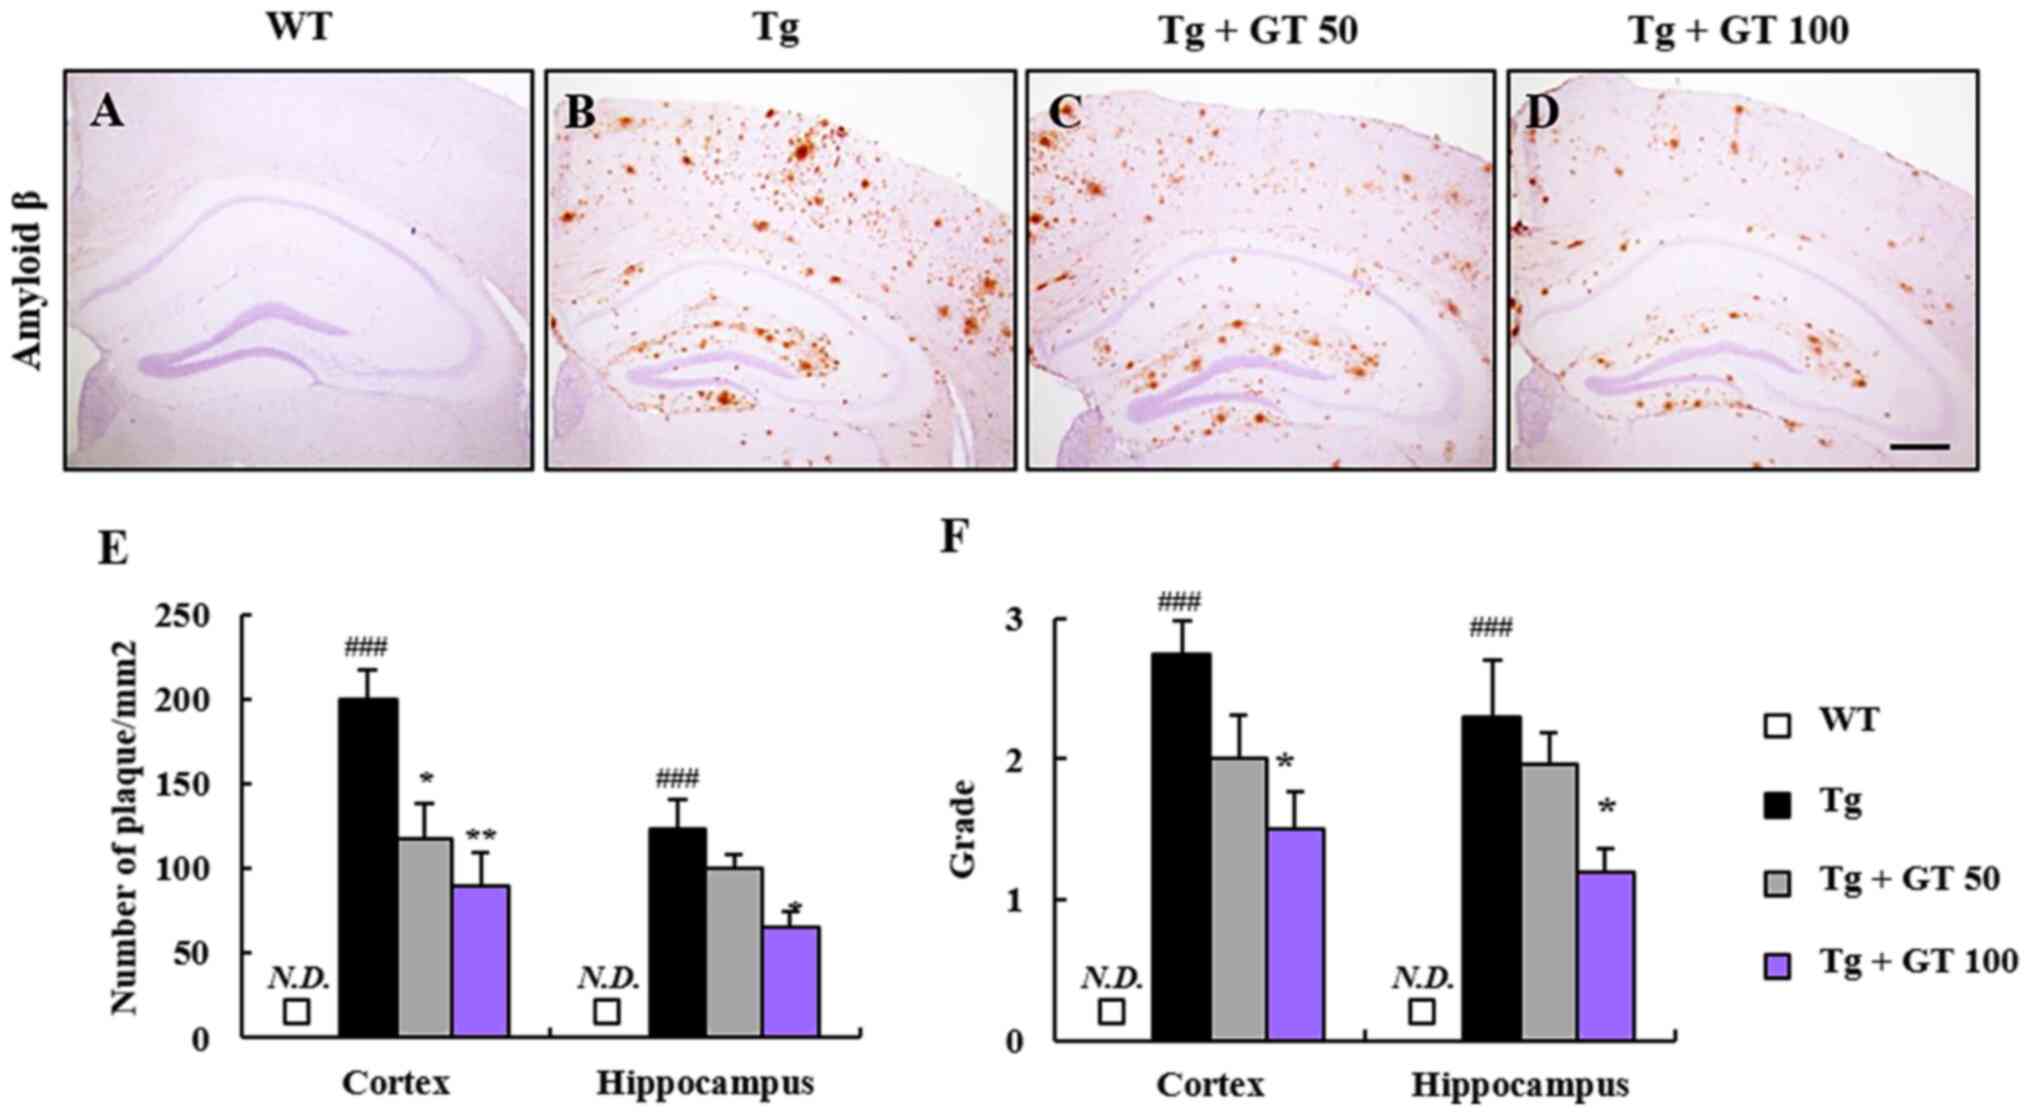 Ginseng Gintonin Attenuates The Disruptions Of Brain Microvascular Permeability And Microvascular Endothelium Junctional Proteins In An Appswe Psen 1 Double Transgenic Mouse Model Of Alzheimer S Disease